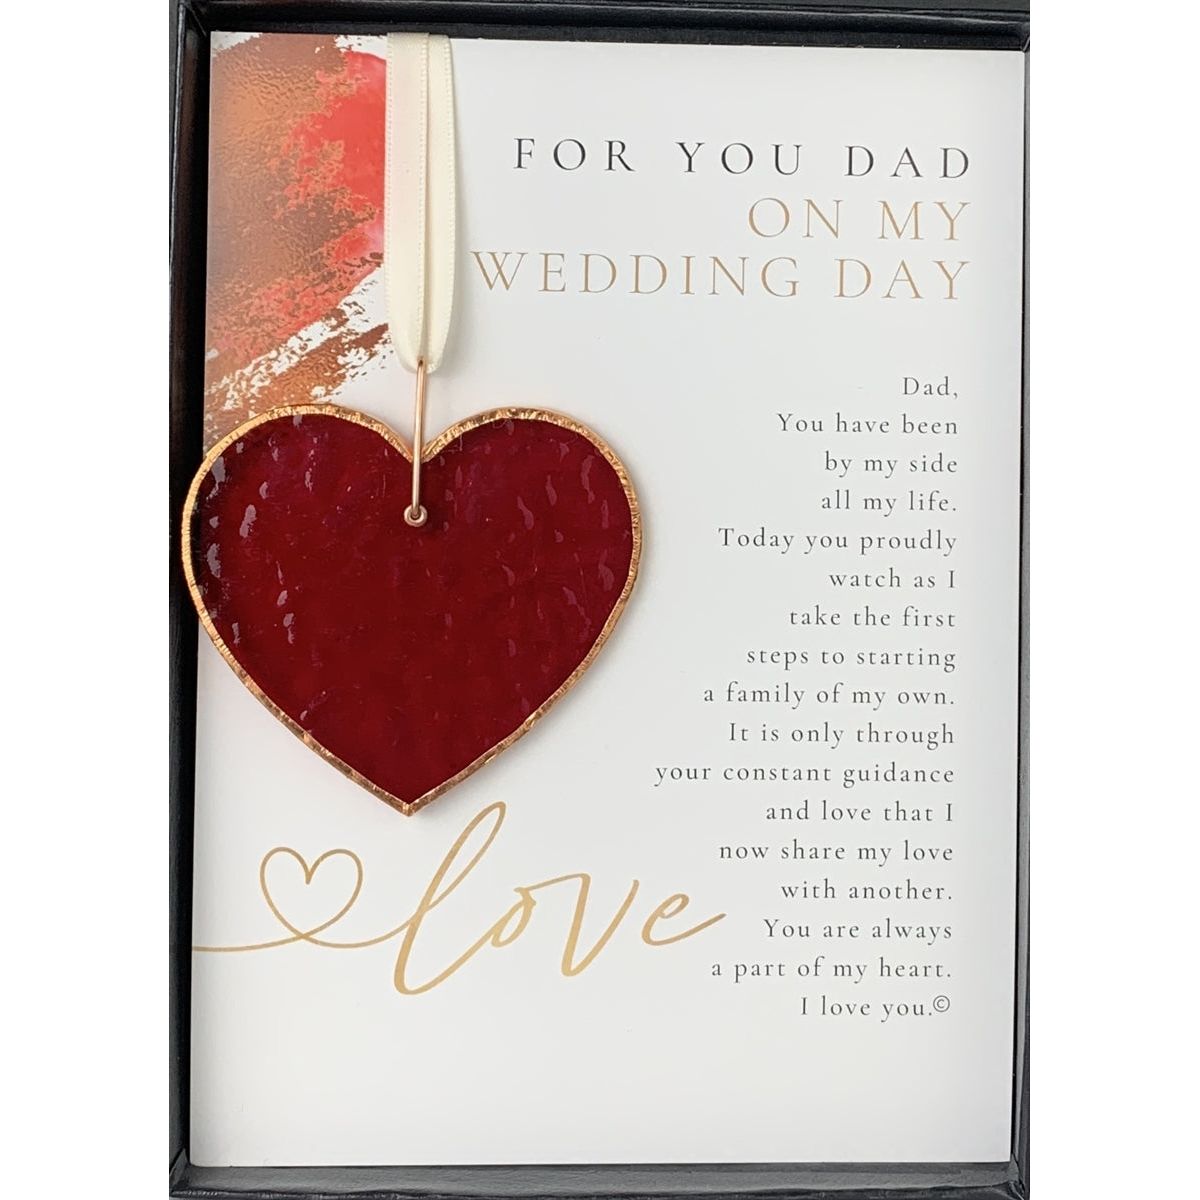 For You Dad on My Wedding Day: Glass Wedding Heart